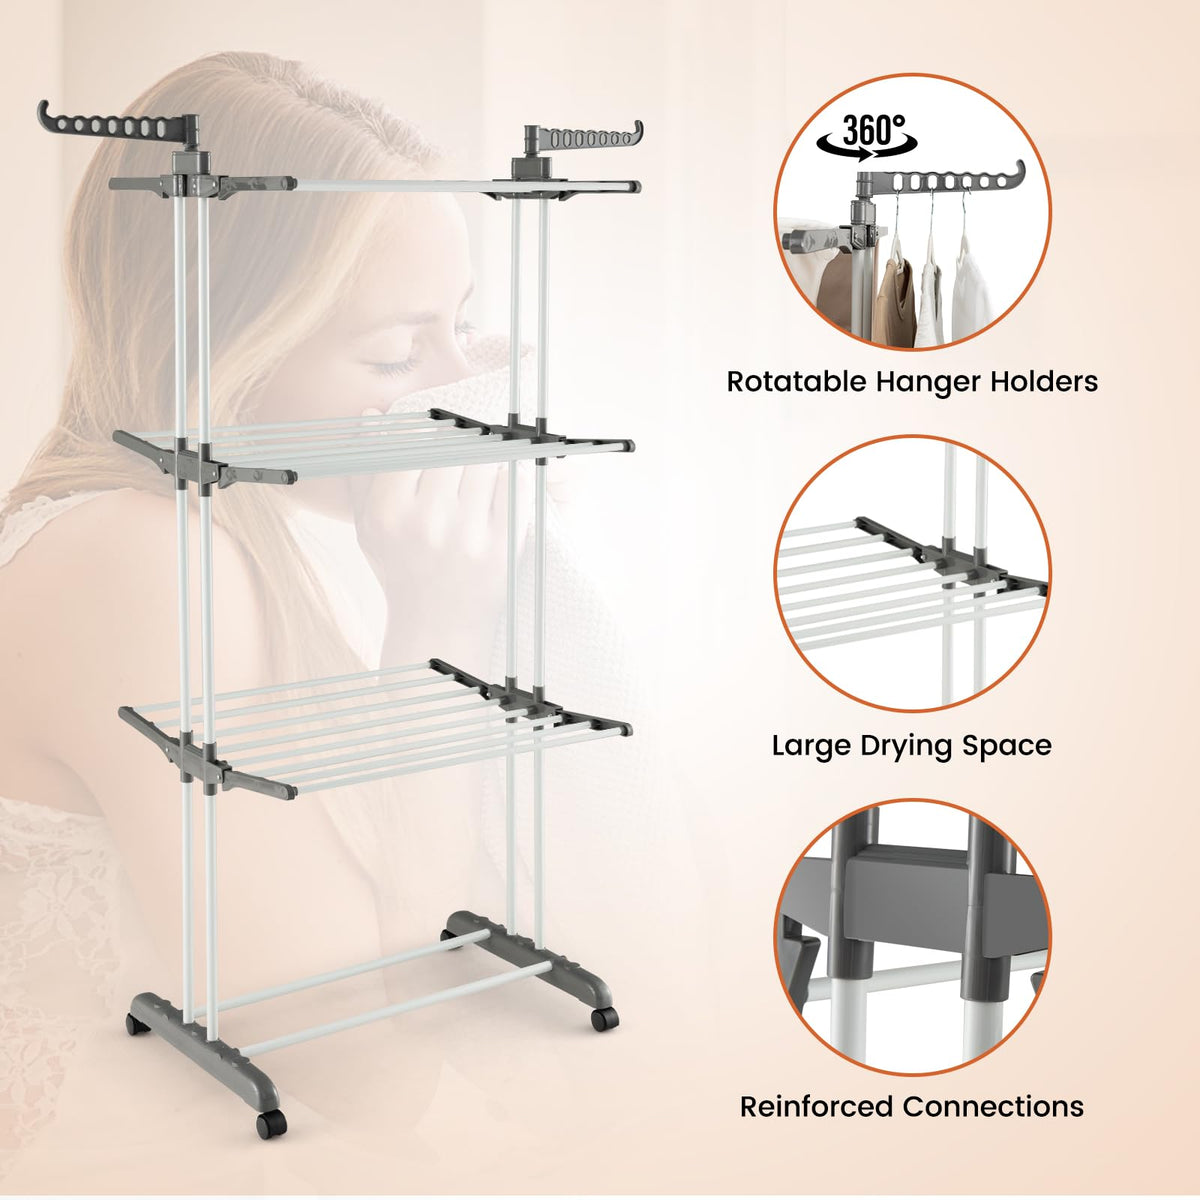 Giantex 4-Tier Clothes Drying Rack, Folding Clothes Horse Stand with Rotatable Side Wings